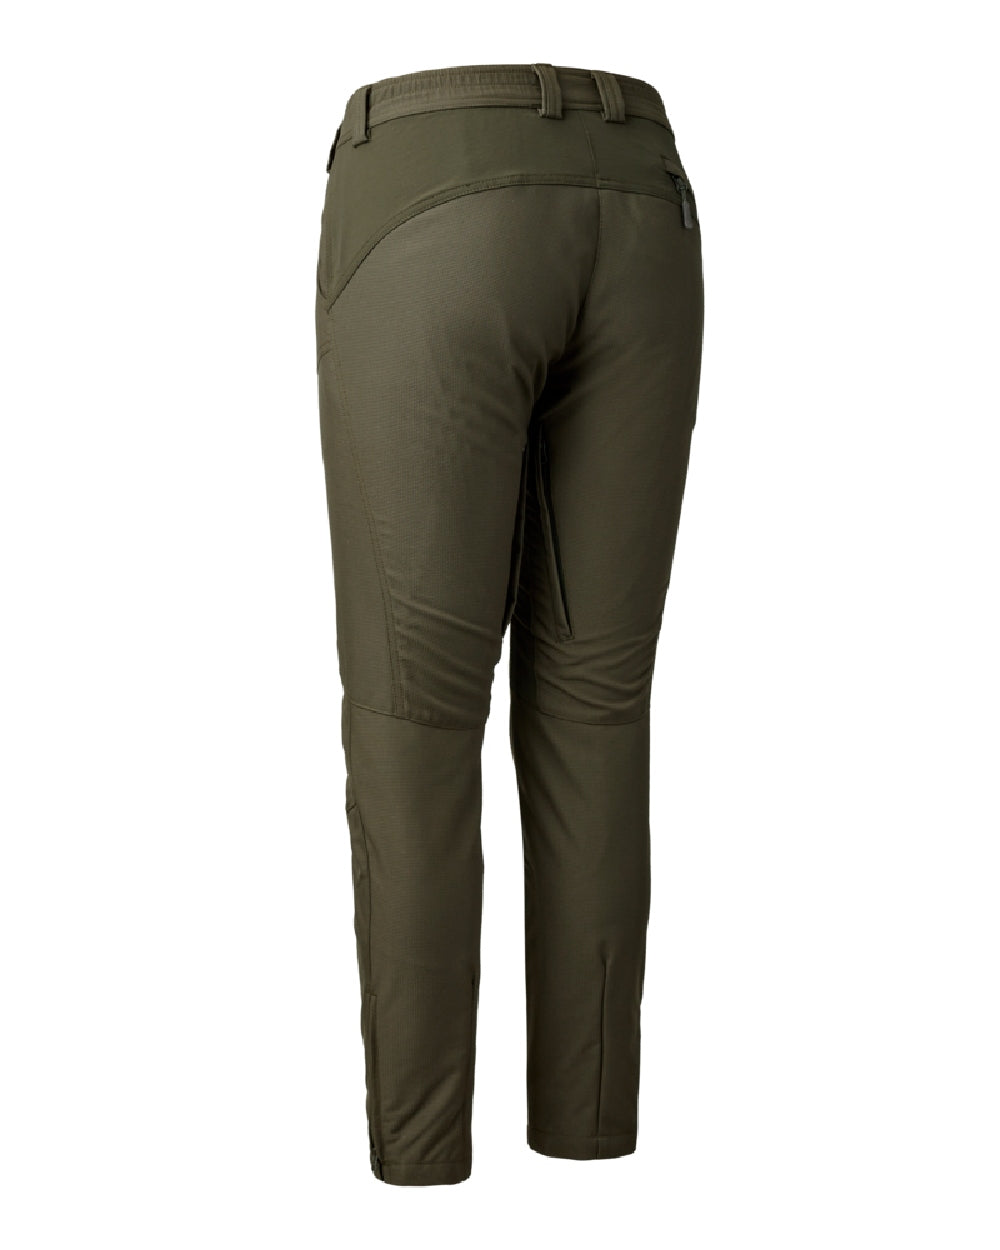 Deerhunter Lady Ann Extreme Boot Trousers with membrane in Palm Green